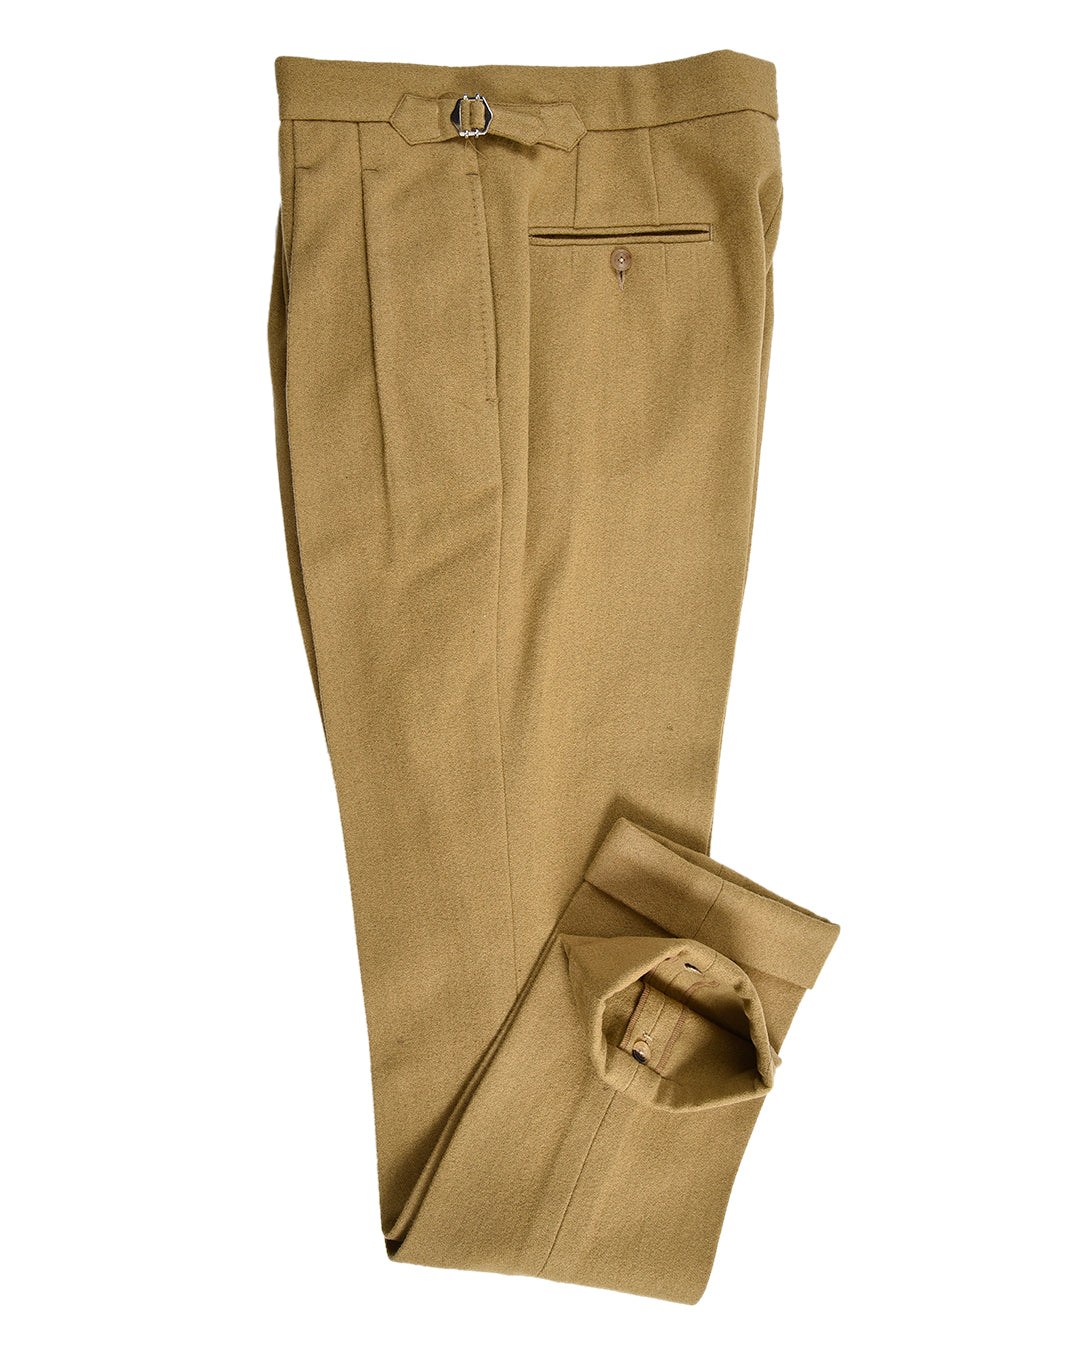 Washable Wool Pants: Camel Wool Rich Flannel High Waisted Pant